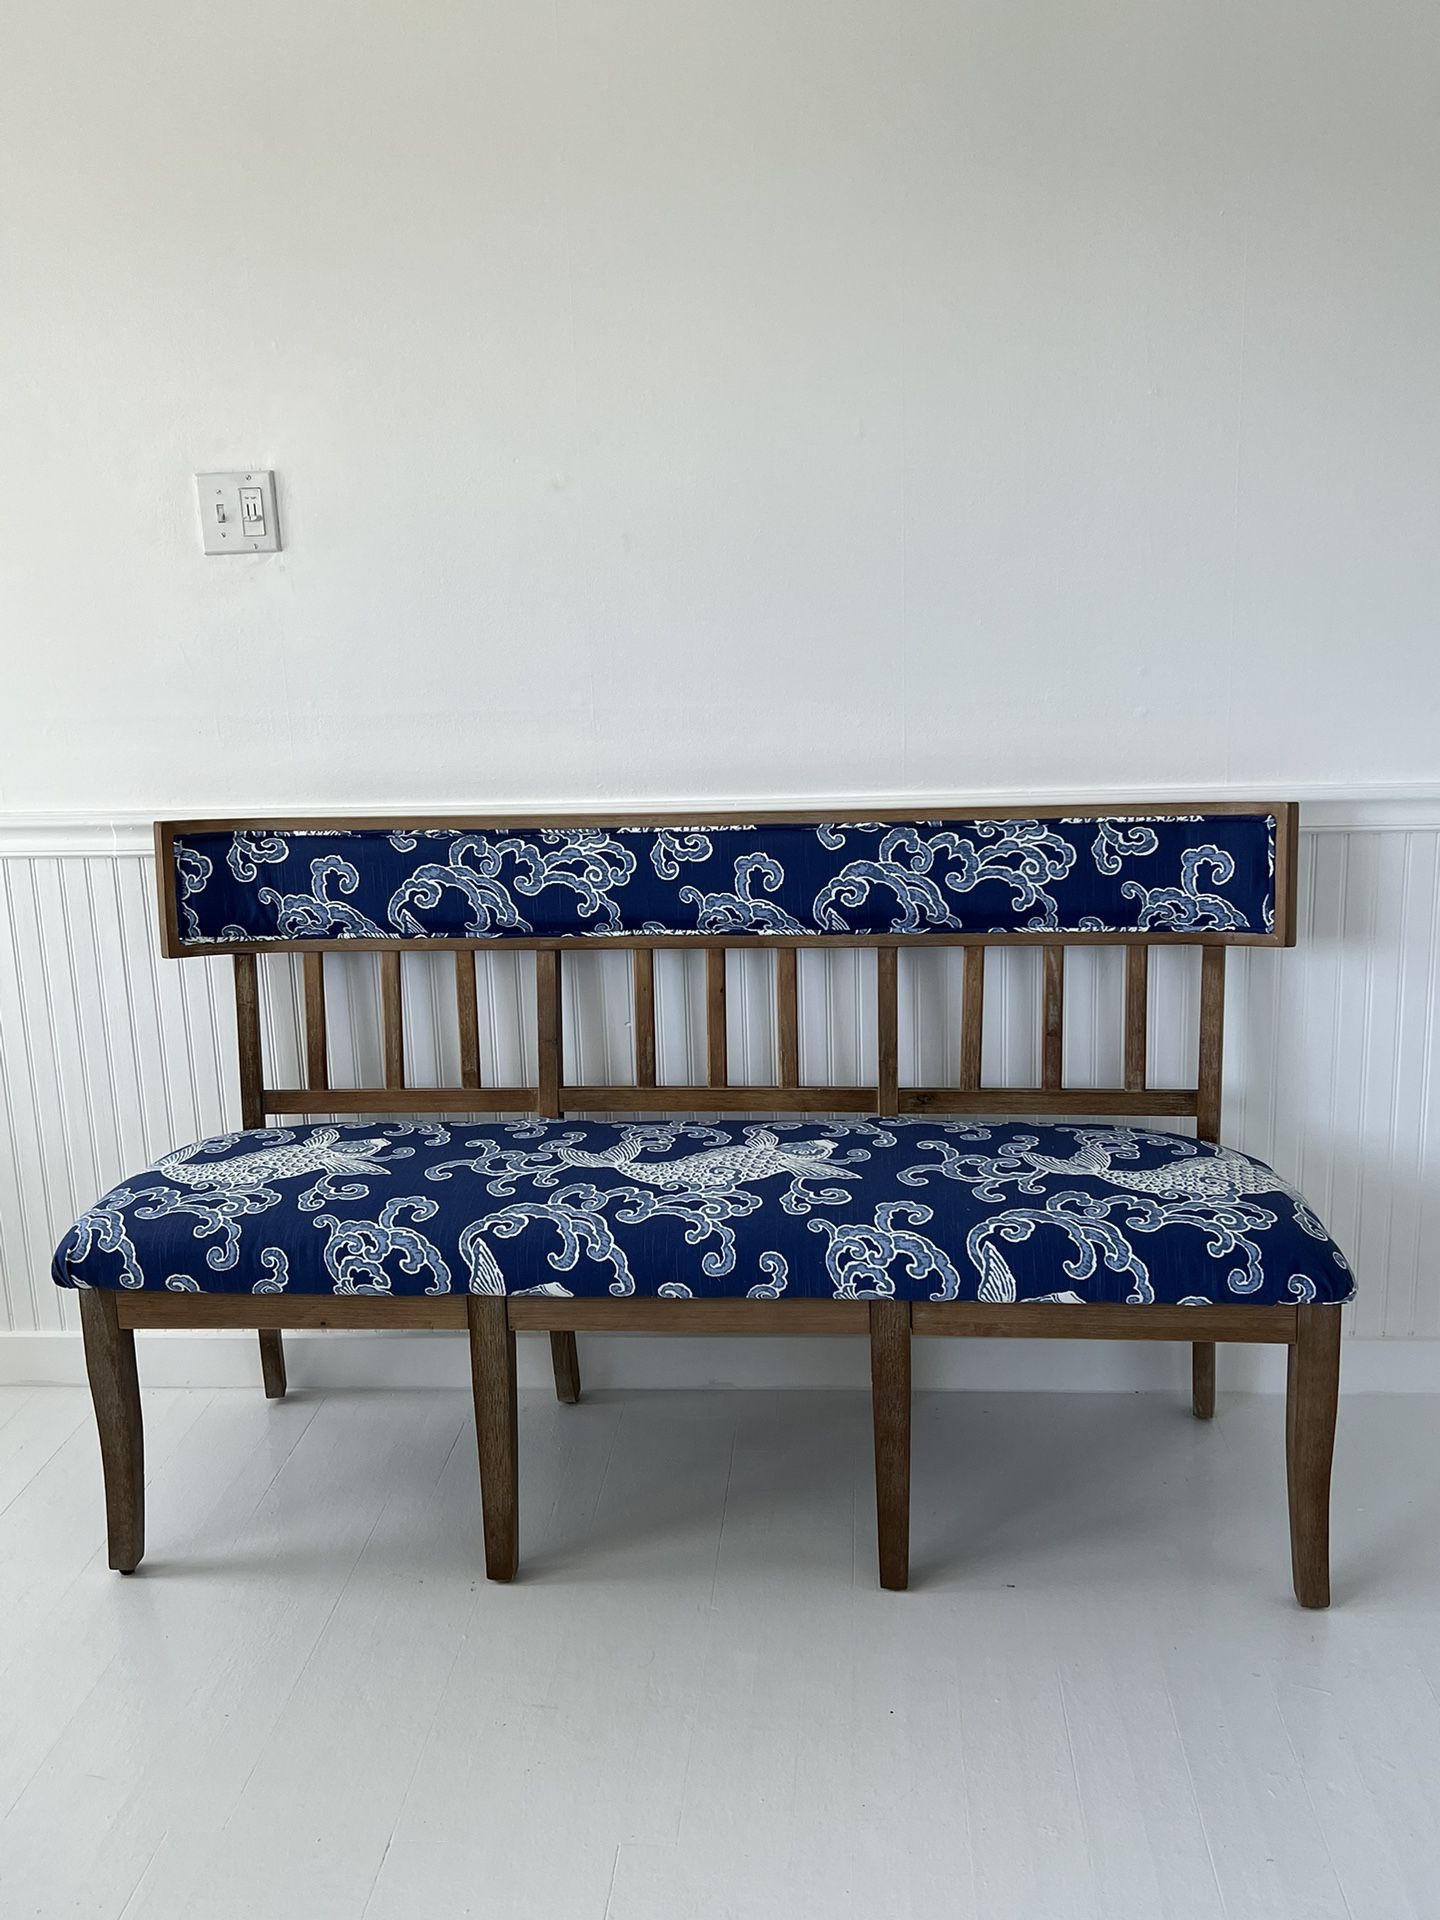 Beautiful Upholstered Bench